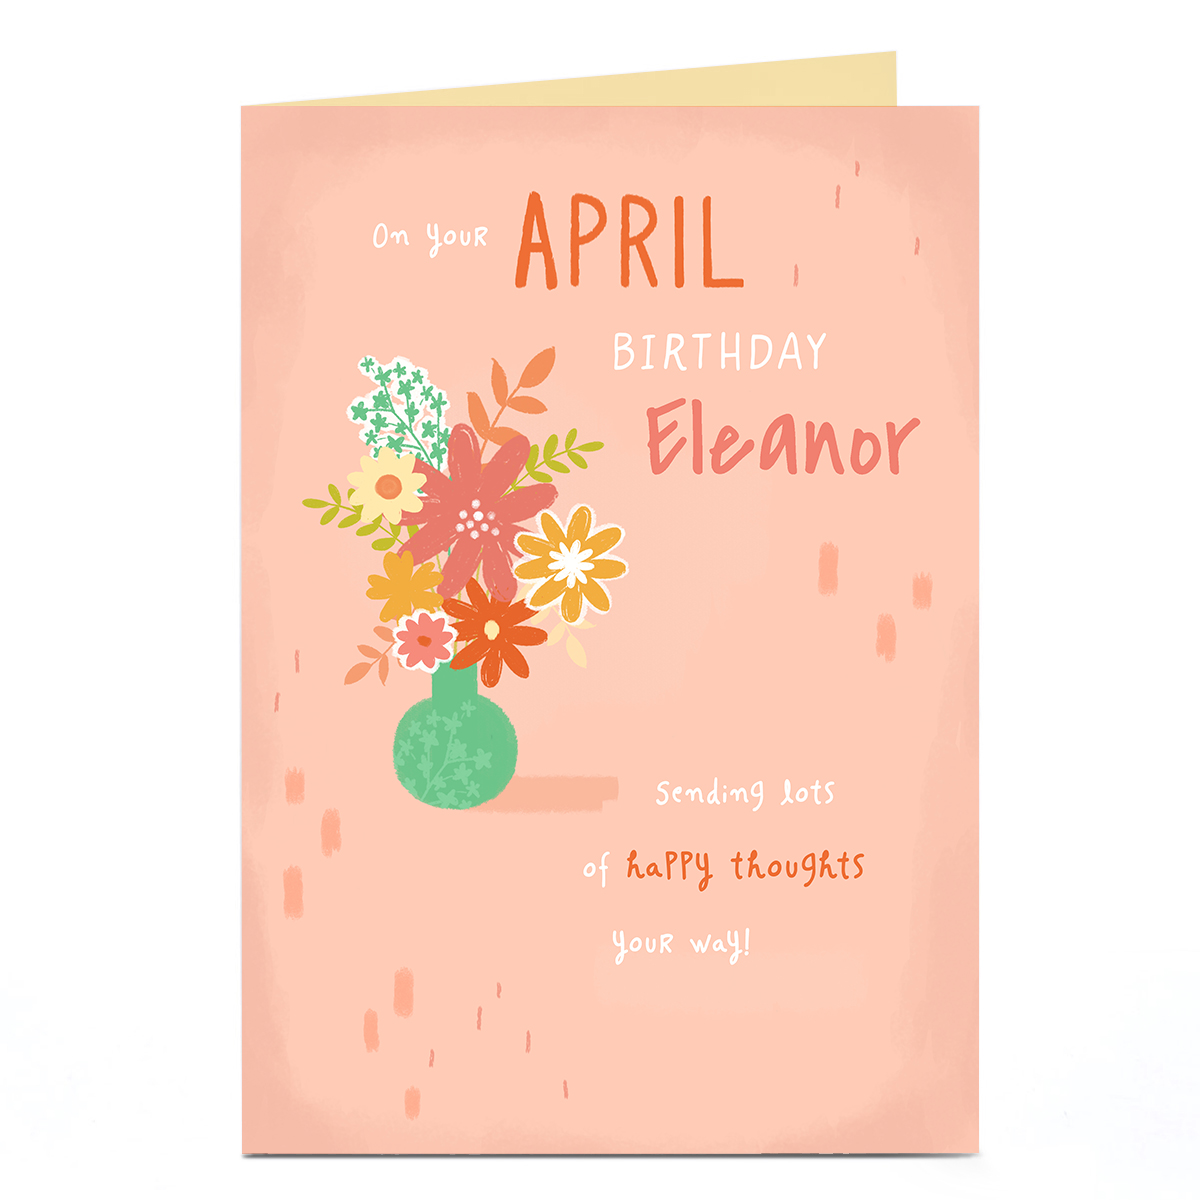 Personalised Birthday Card - April Birthday Happy Thoughts